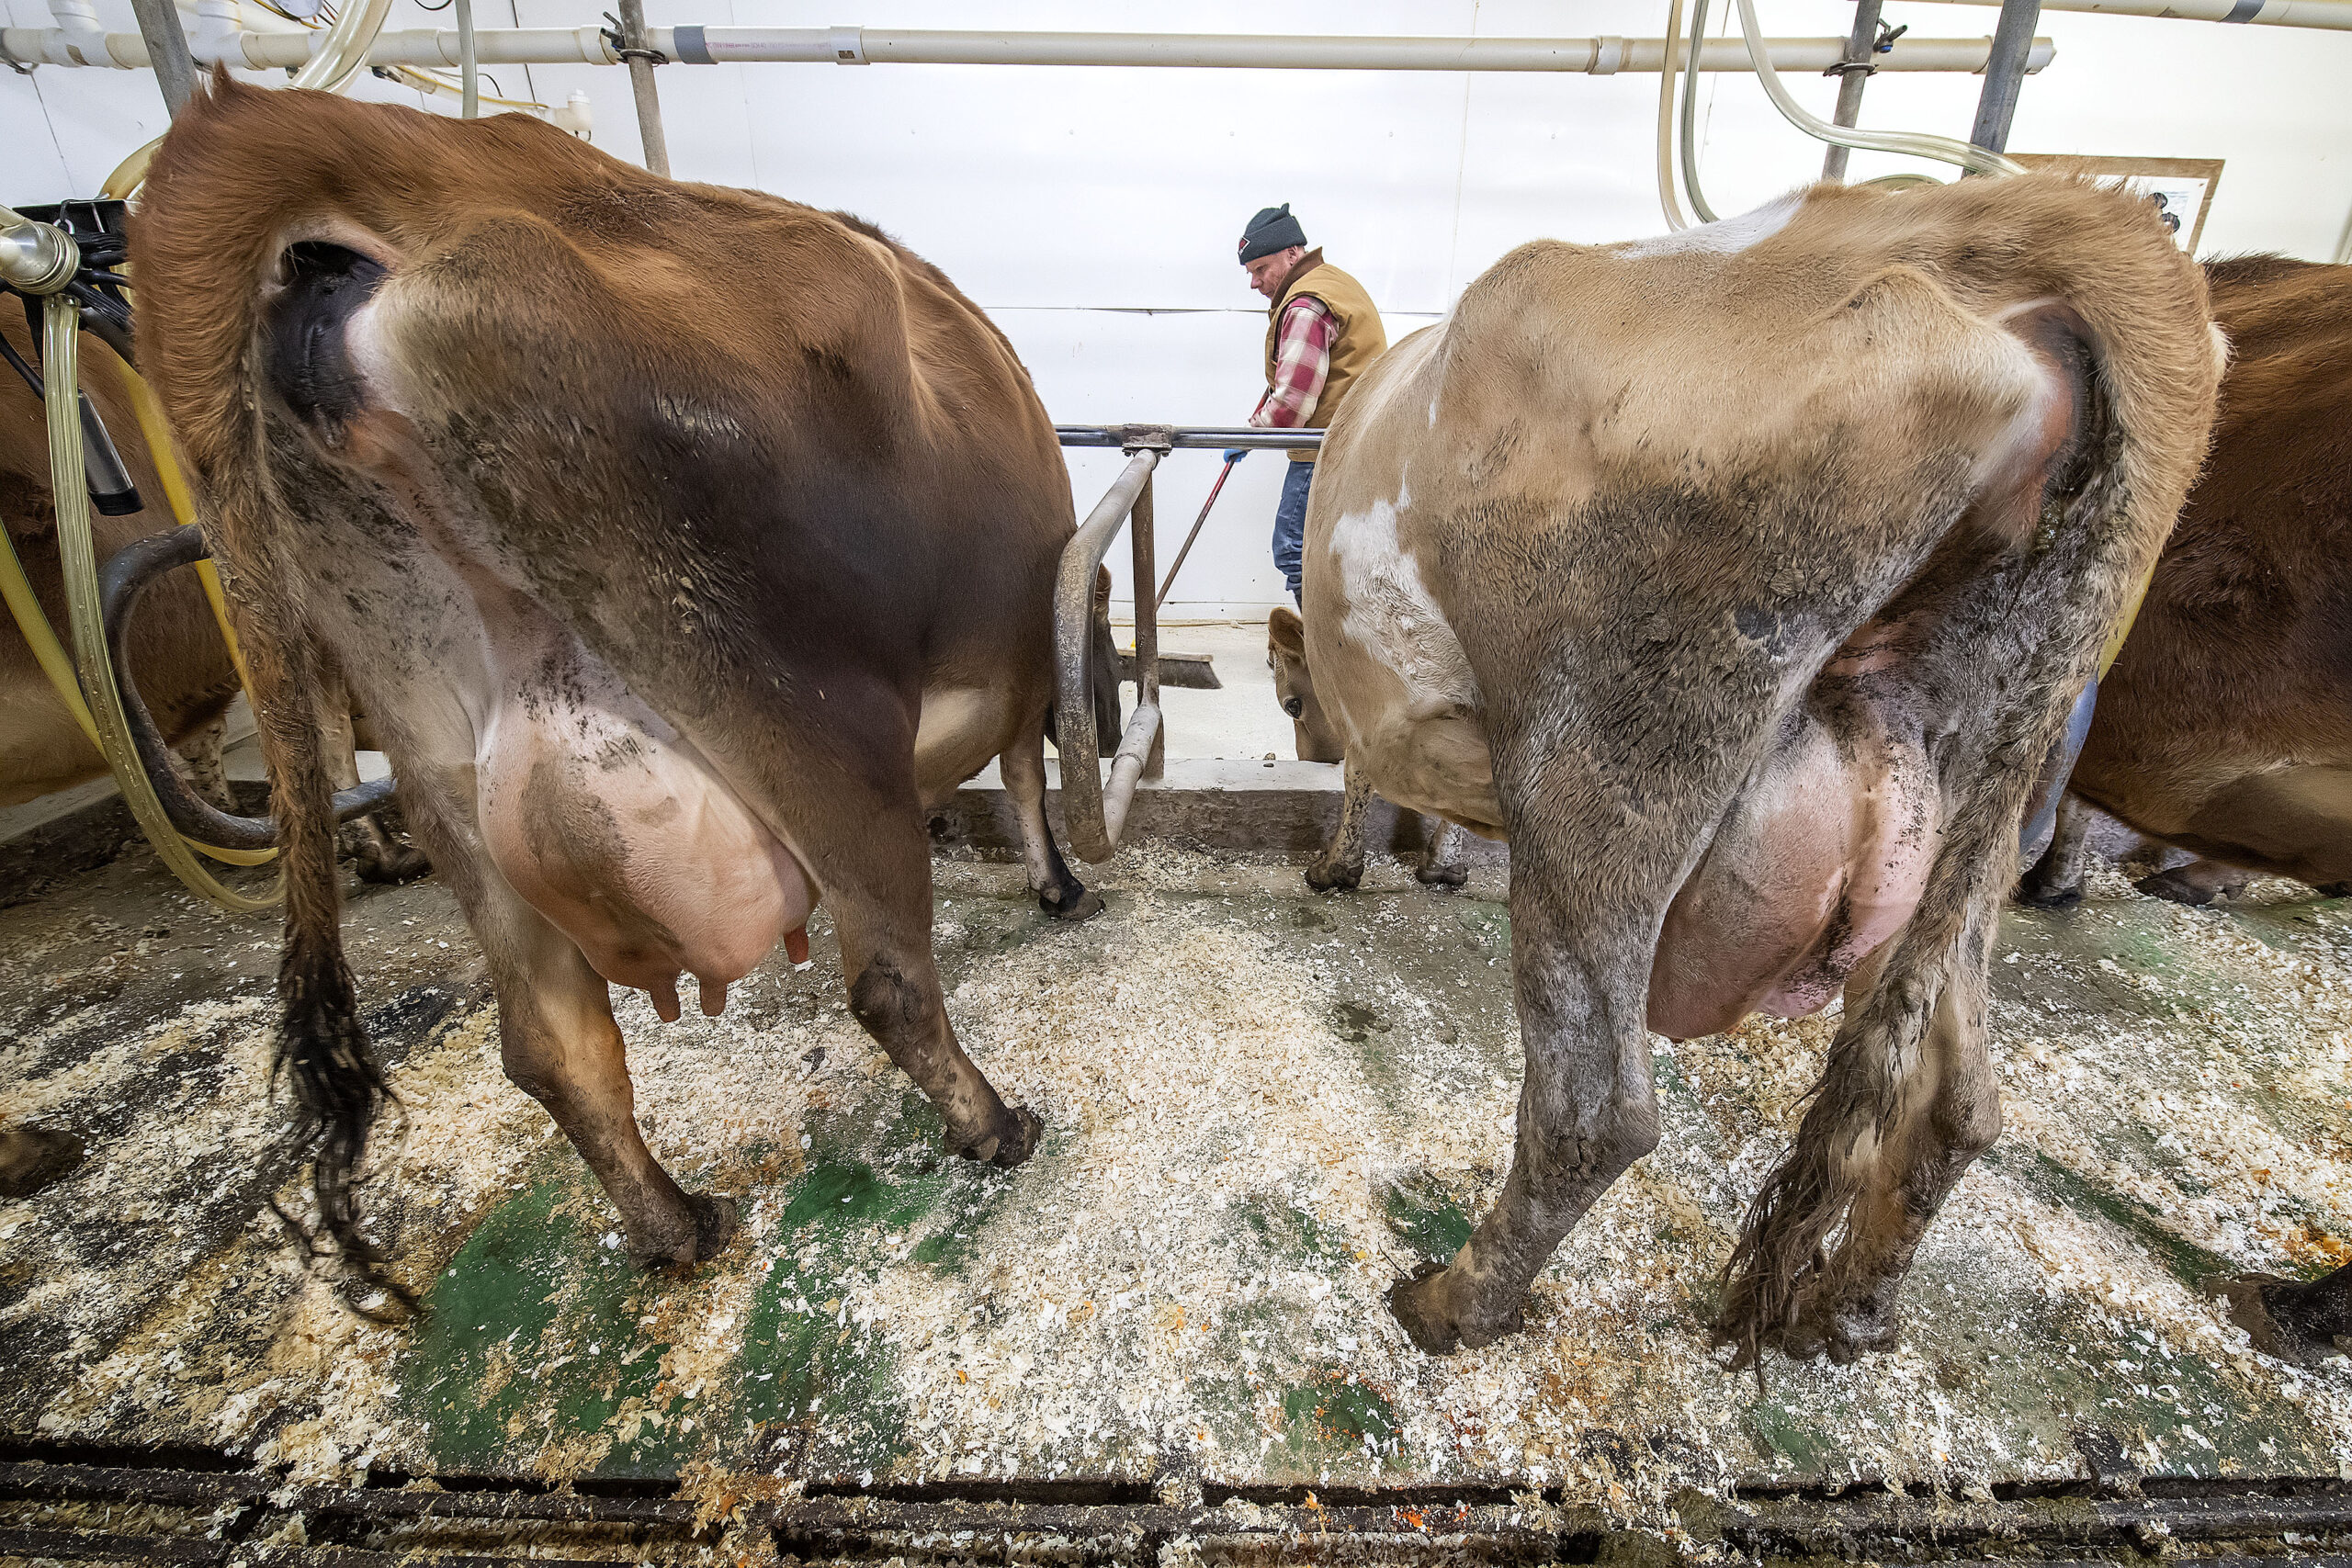 Herdsman Claes Cassel sweeps up as the cows are being milked inside the milking pen during the afternoon milking of the cows at the Mecox Bay Dairy on March 1st, 2022